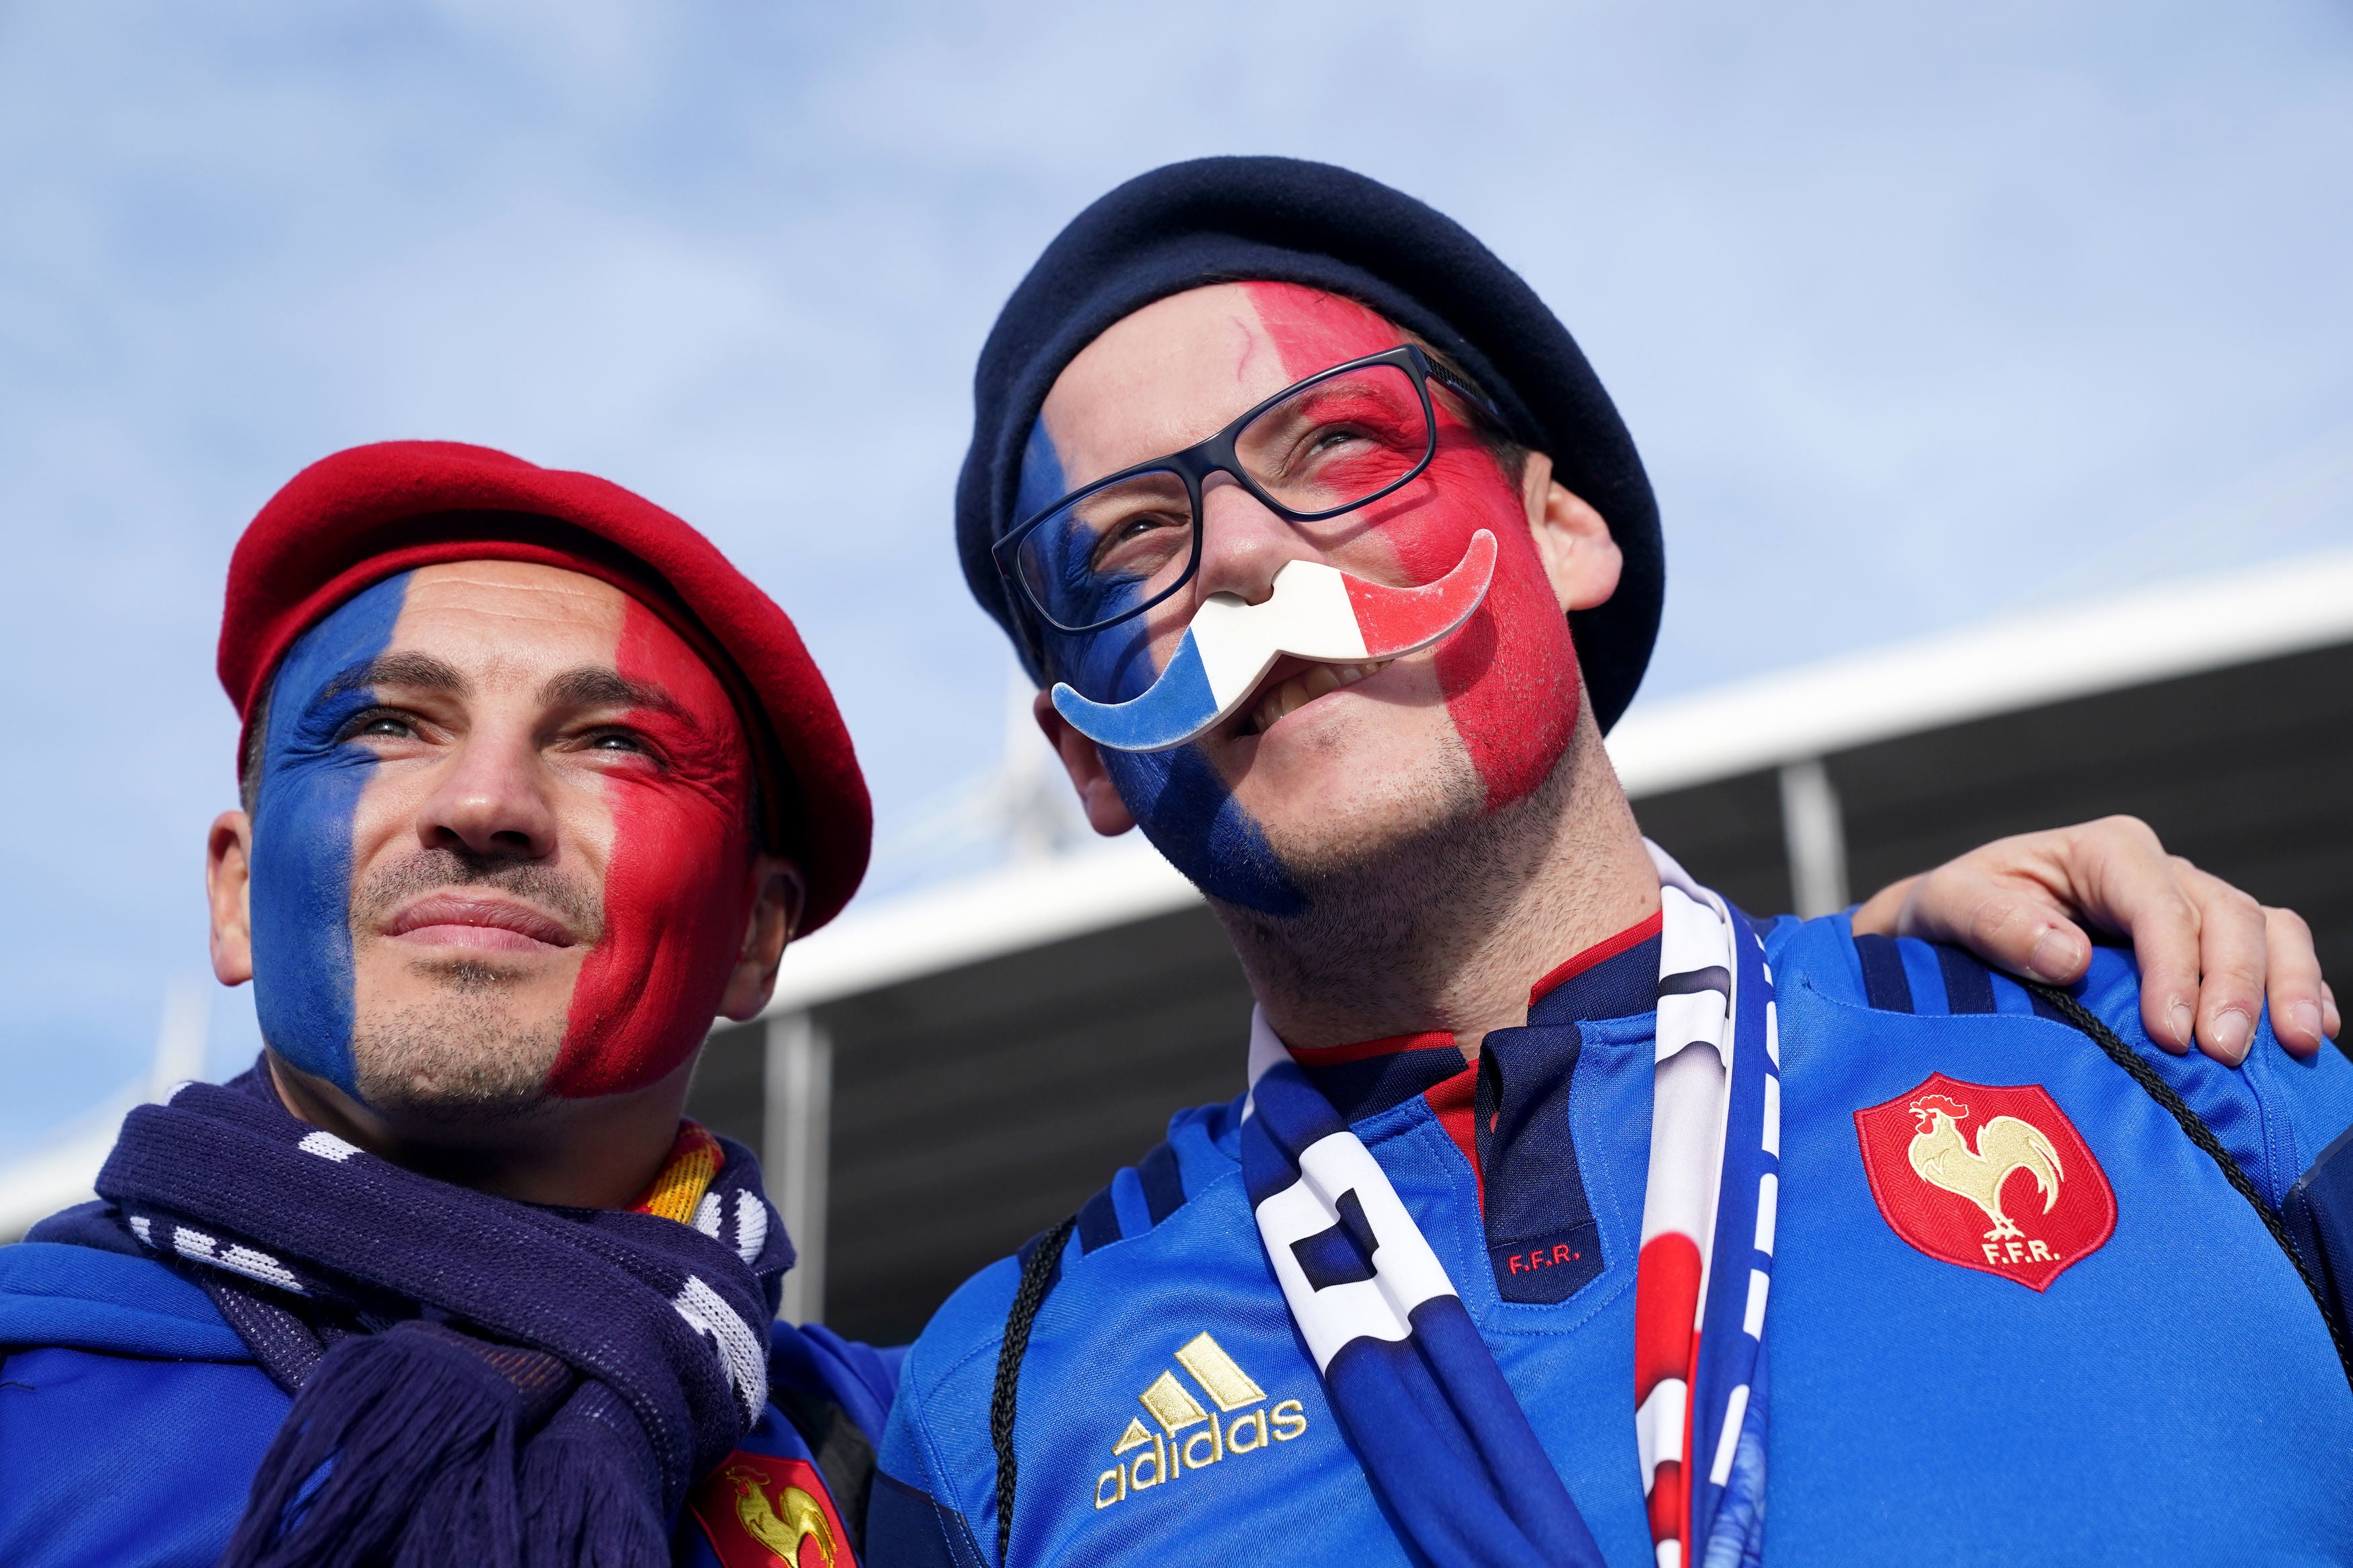 The World Cup may lose the passion and vibrancy of France fans after Les Bleus’ exit